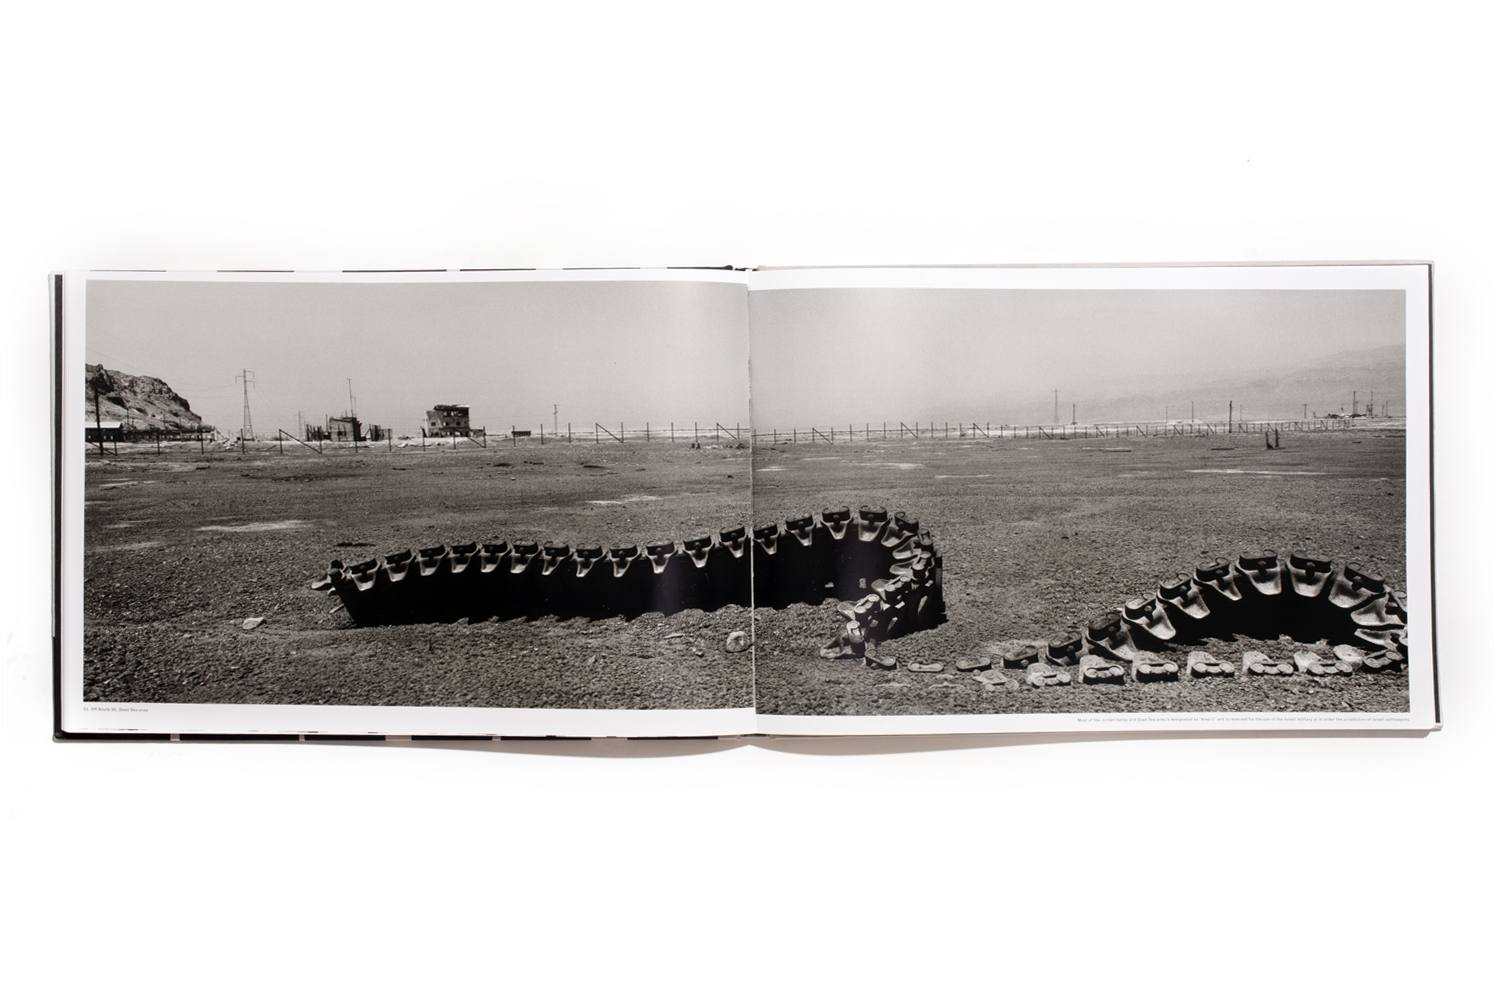 We’ve seen Josef Koudelka’s stunning black-and-white panoramas before, in Chaos. Individually, these photographs of the ‘security fence’ (as Israelis call it) or the apartheid wall (as it is known by the Palestinians whose lives and landscape are blighted by it) have a stark and spectacular beauty. Taken together they create a daunting feeling of visual incarceration so intense, on a scale so massive, that the sky itself is — by turns — implicated, outraged. —Geoff Dyer, author